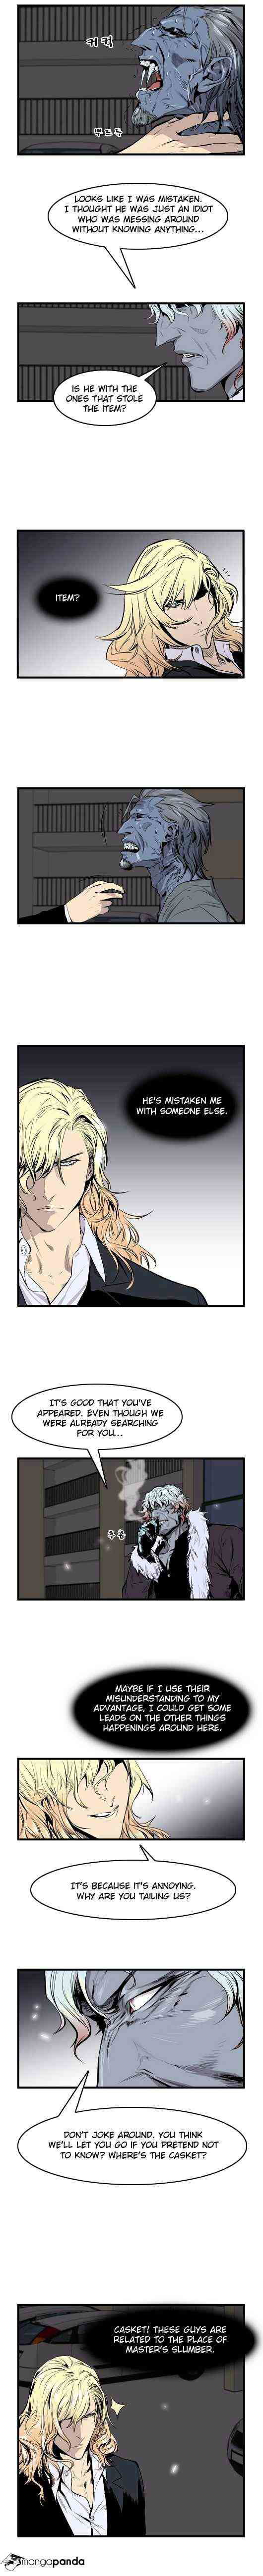 Noblesse Chapter 44 page 3